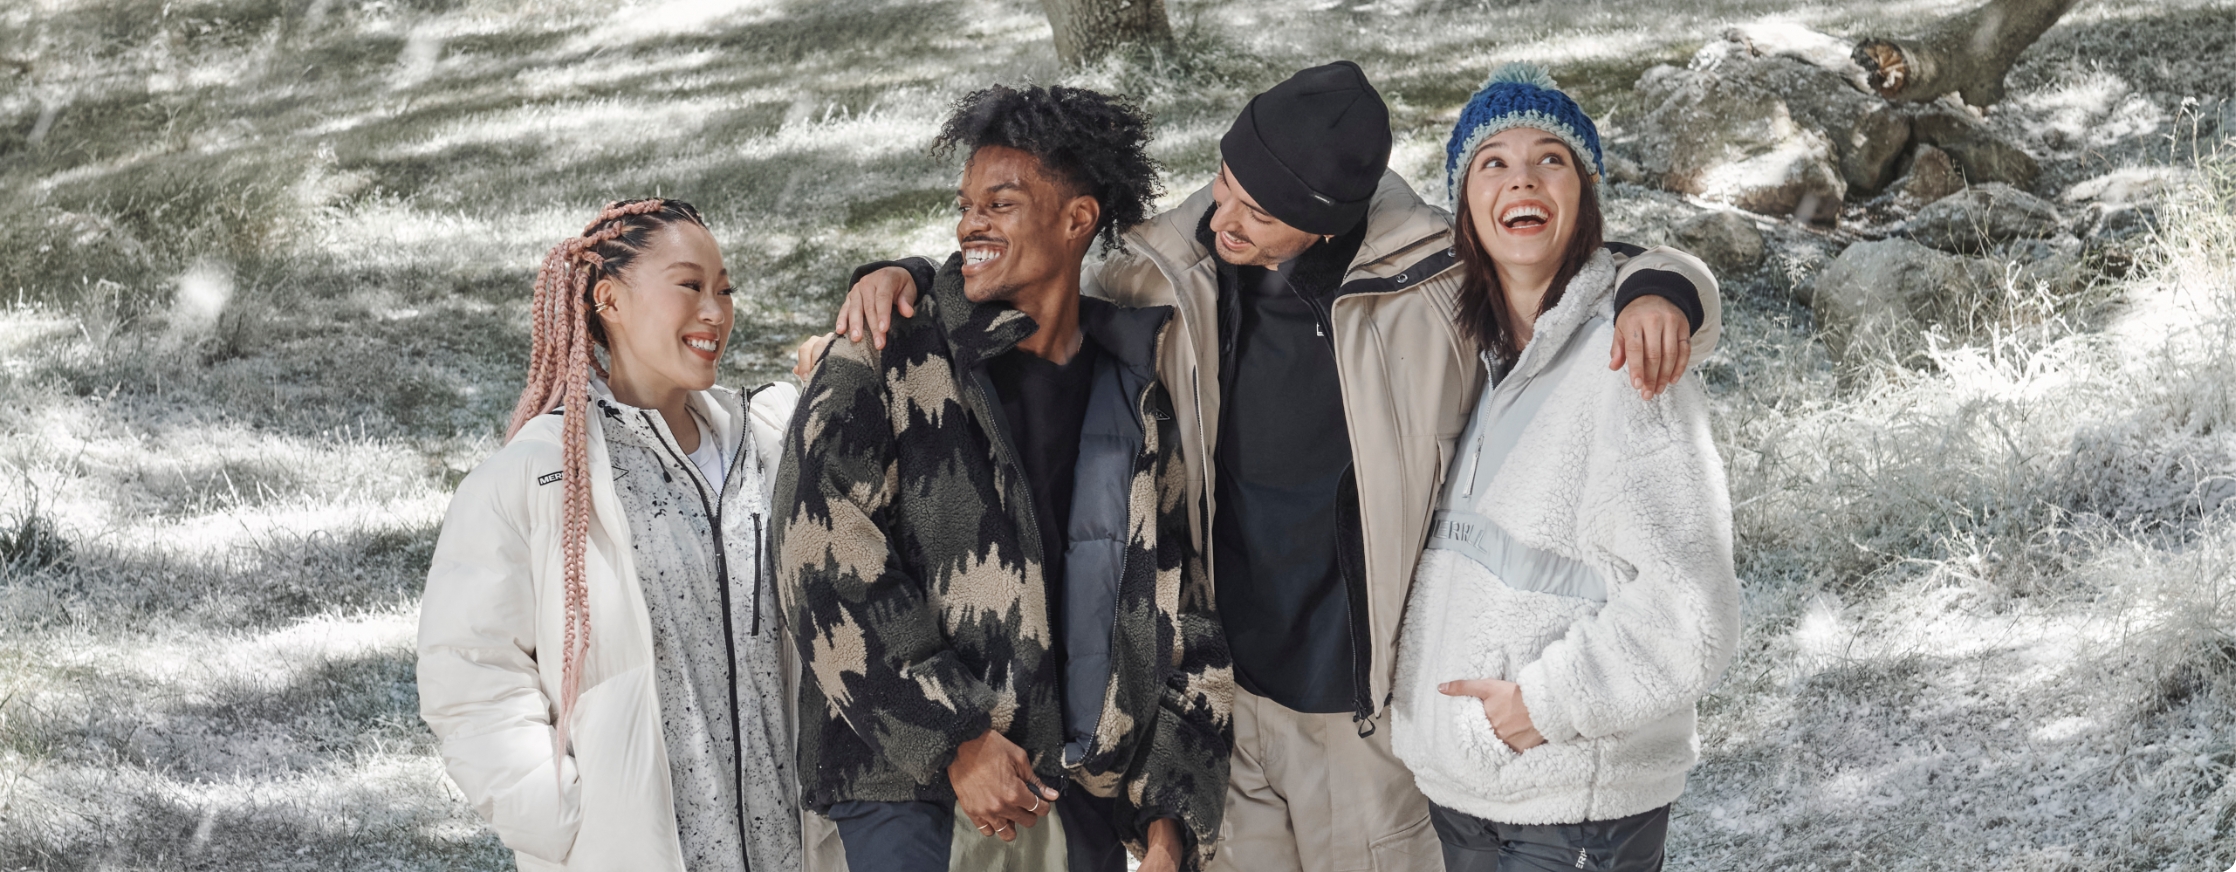 People standing happily together in the snow wearing Merrell clothes.